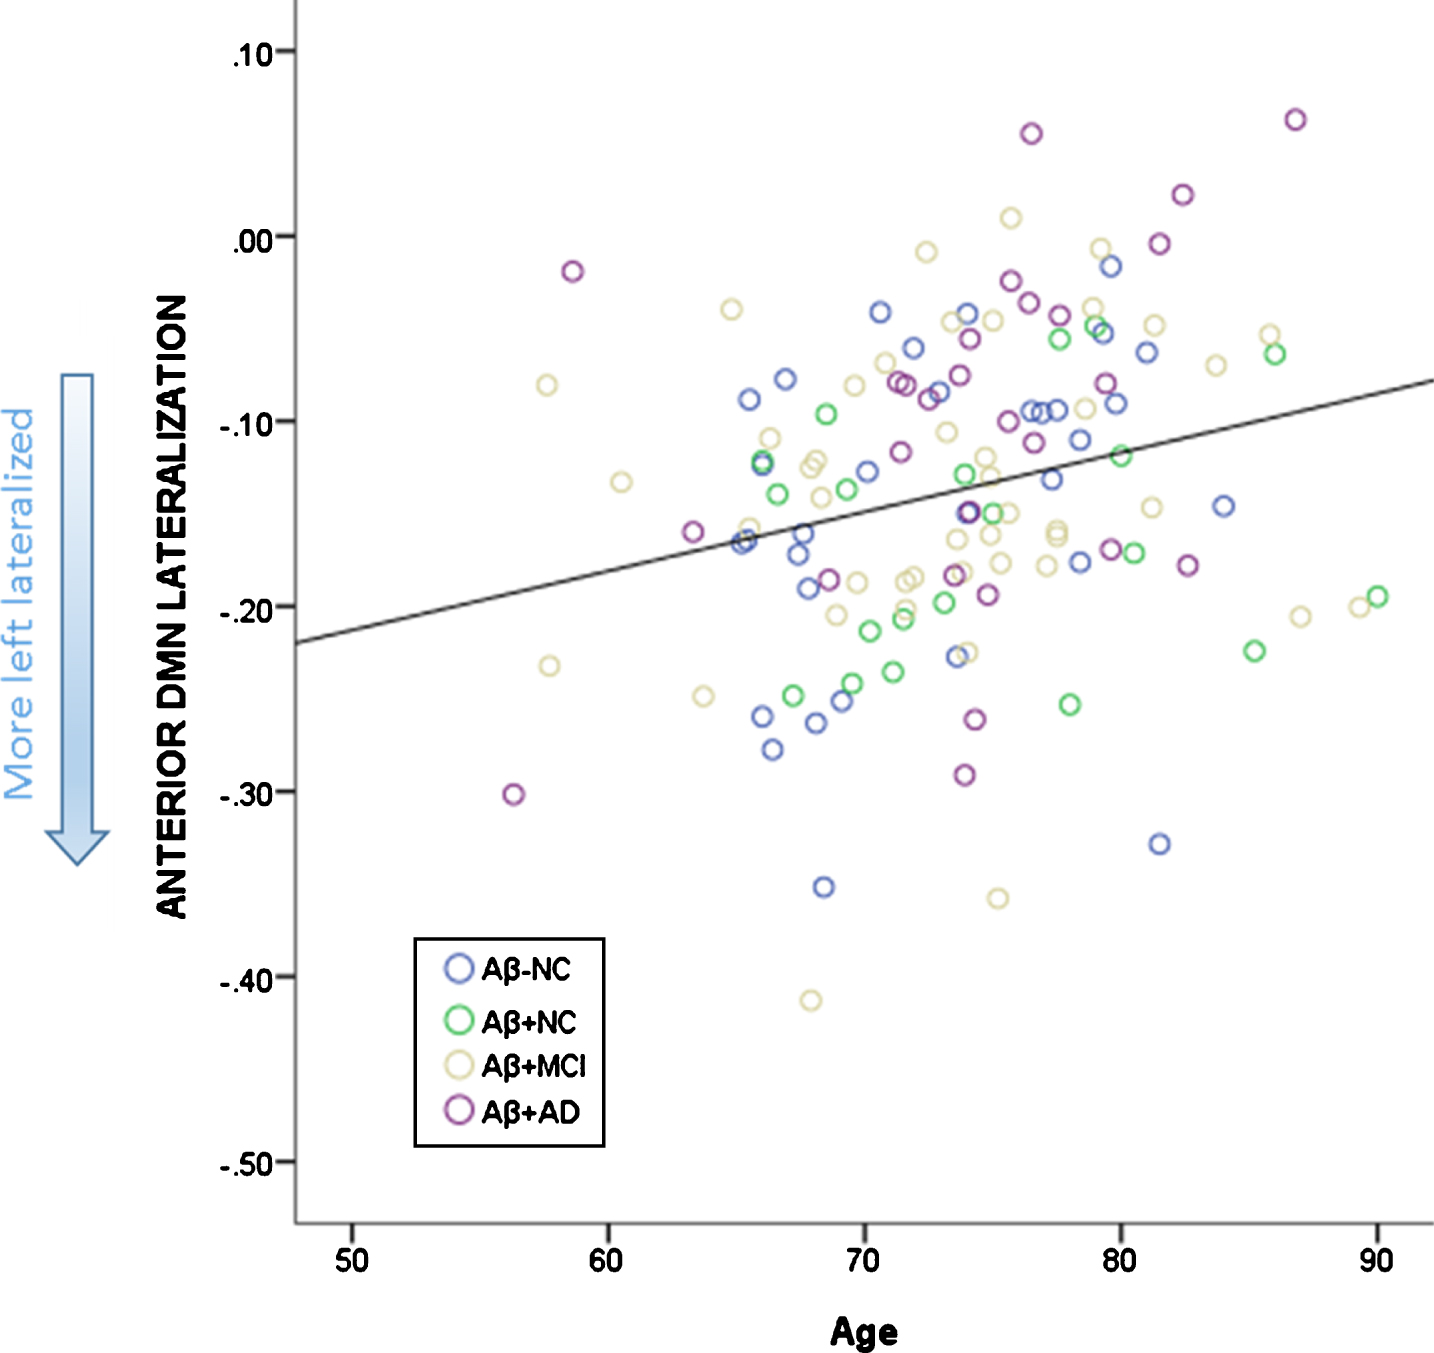 Relationship between age and lateralization of the aDMN. More left lateralized is depicted by more negative scores.